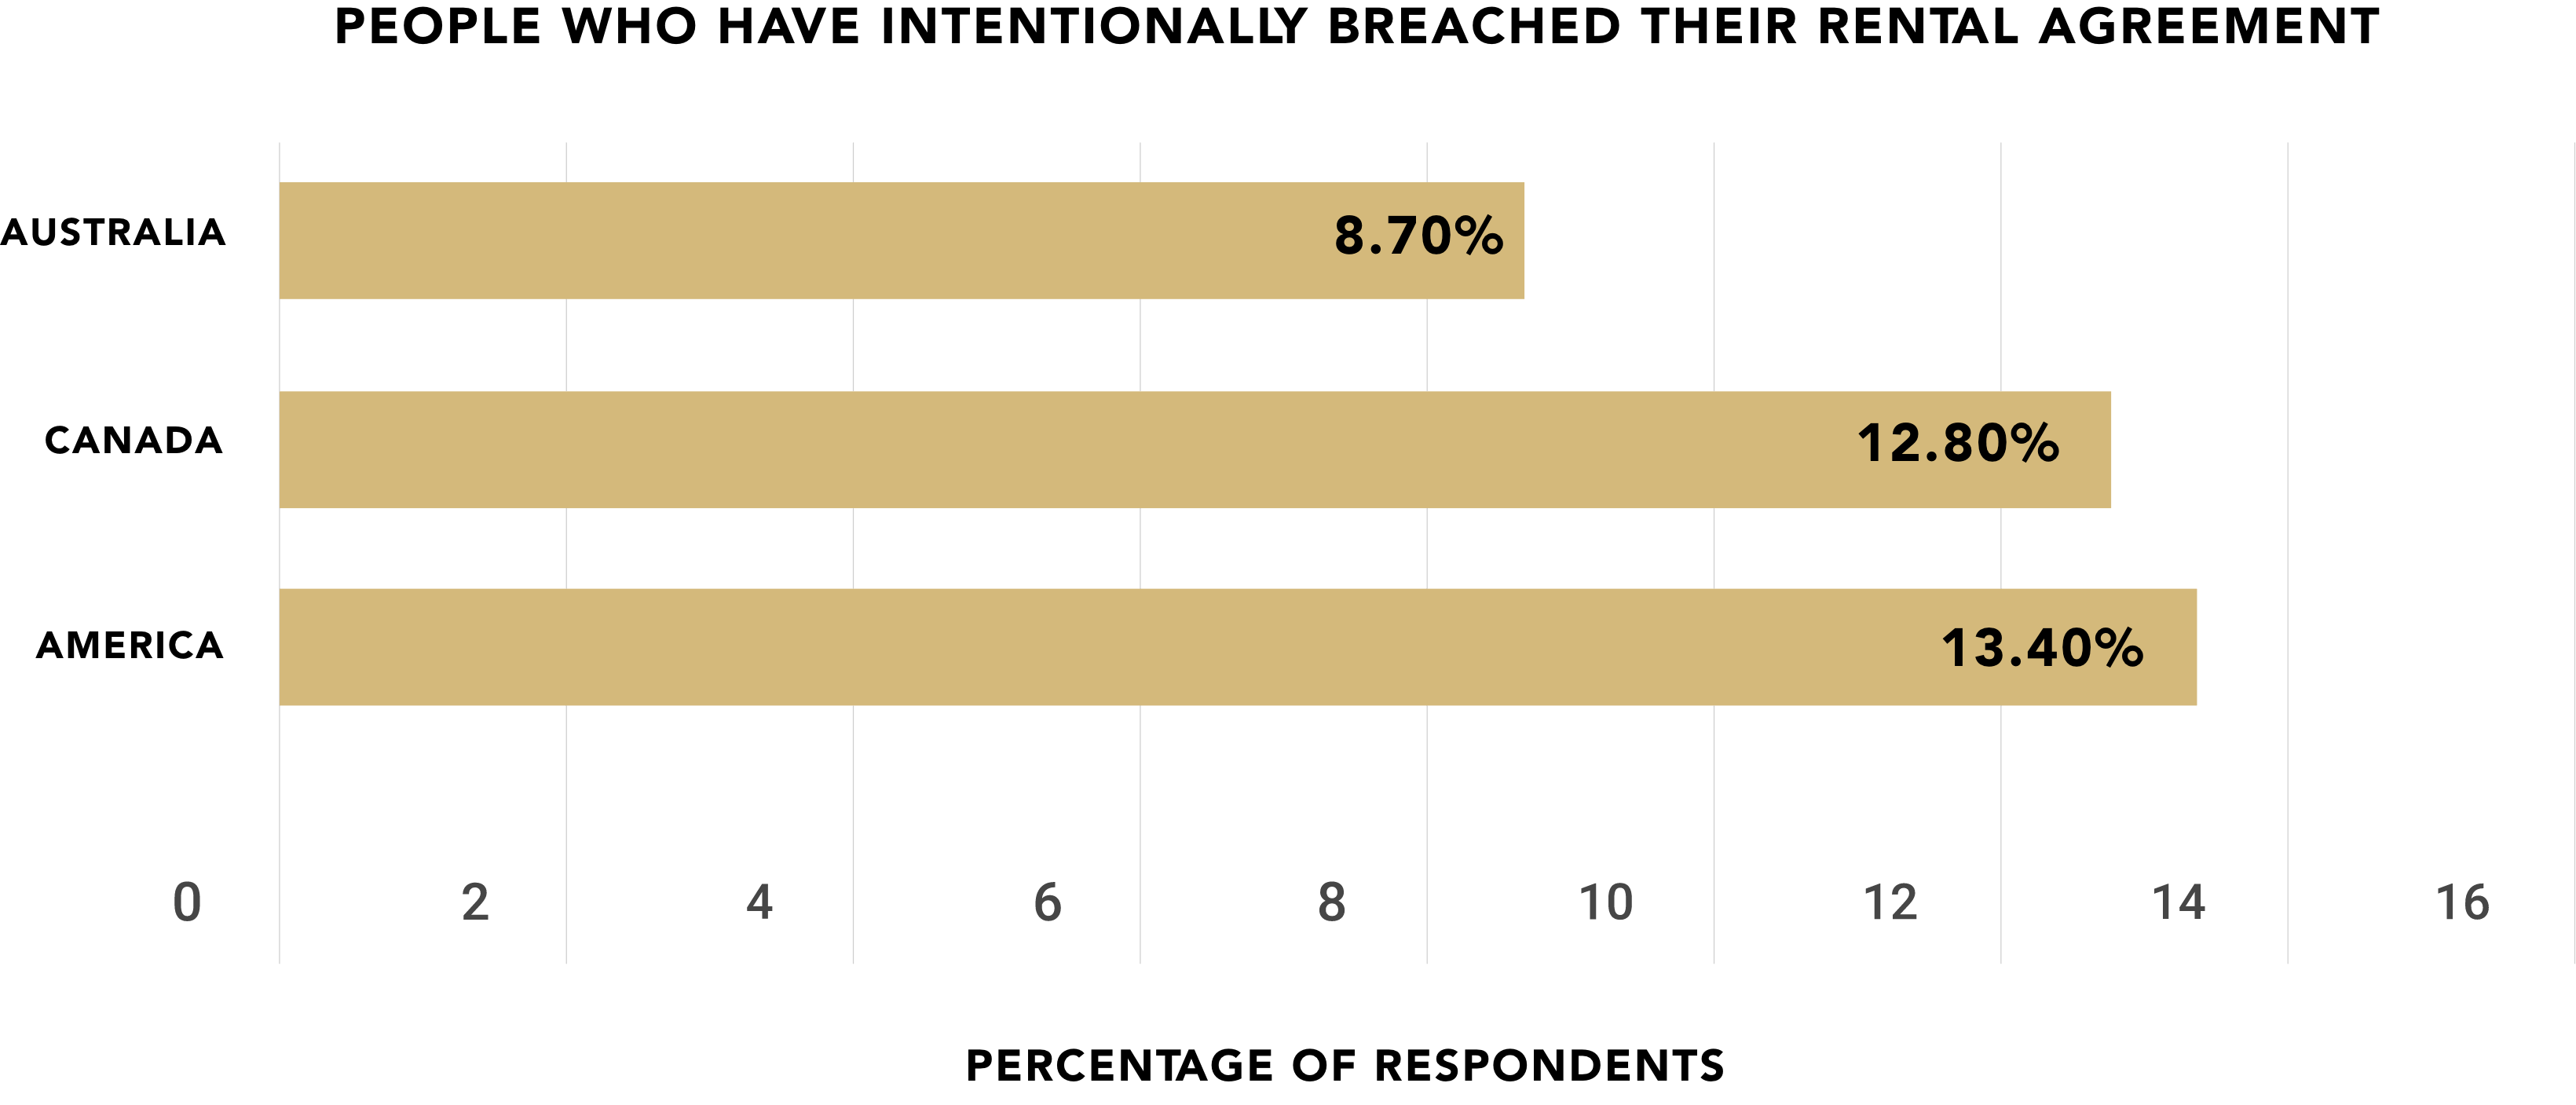 Bar chart showing percentage of Australians, Canadians and Americans who have intentionally breached their rental agreement